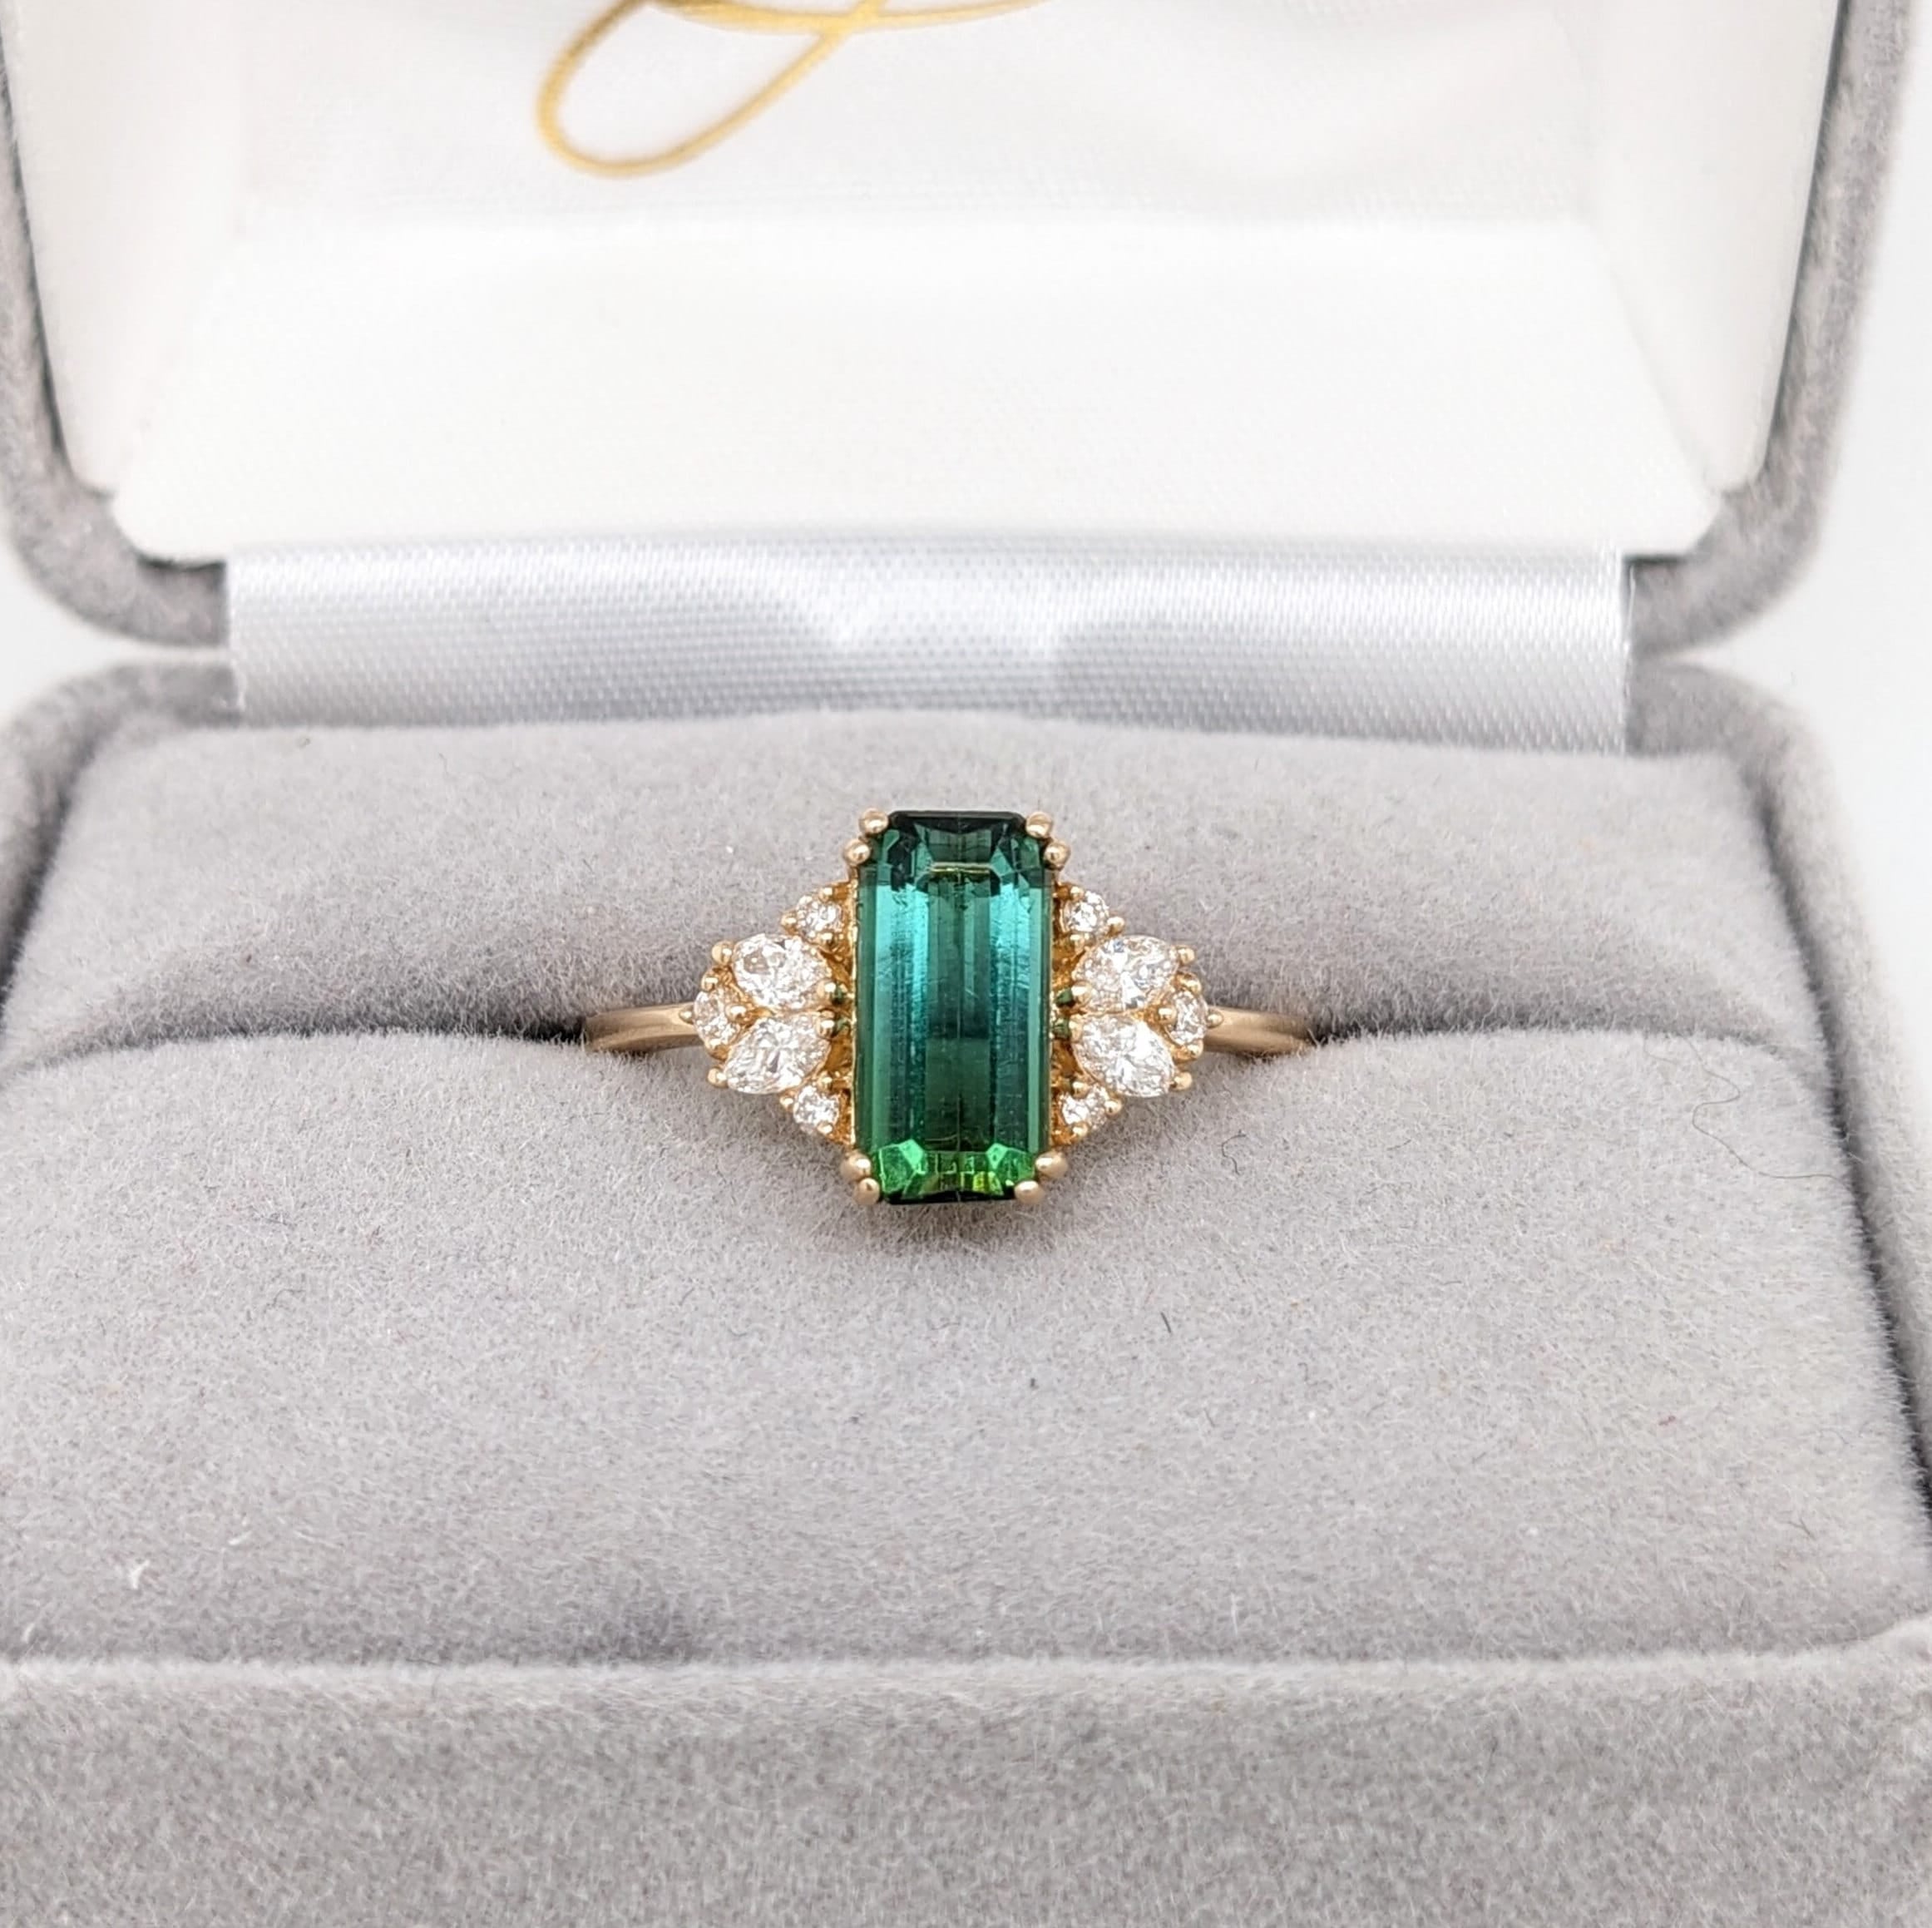 Chrome Tourmaline Ring in 14k Solid Yellow Gold with Natural Diamond Accents | Elongated Emerald Cut 6x5mm | October Birthstone